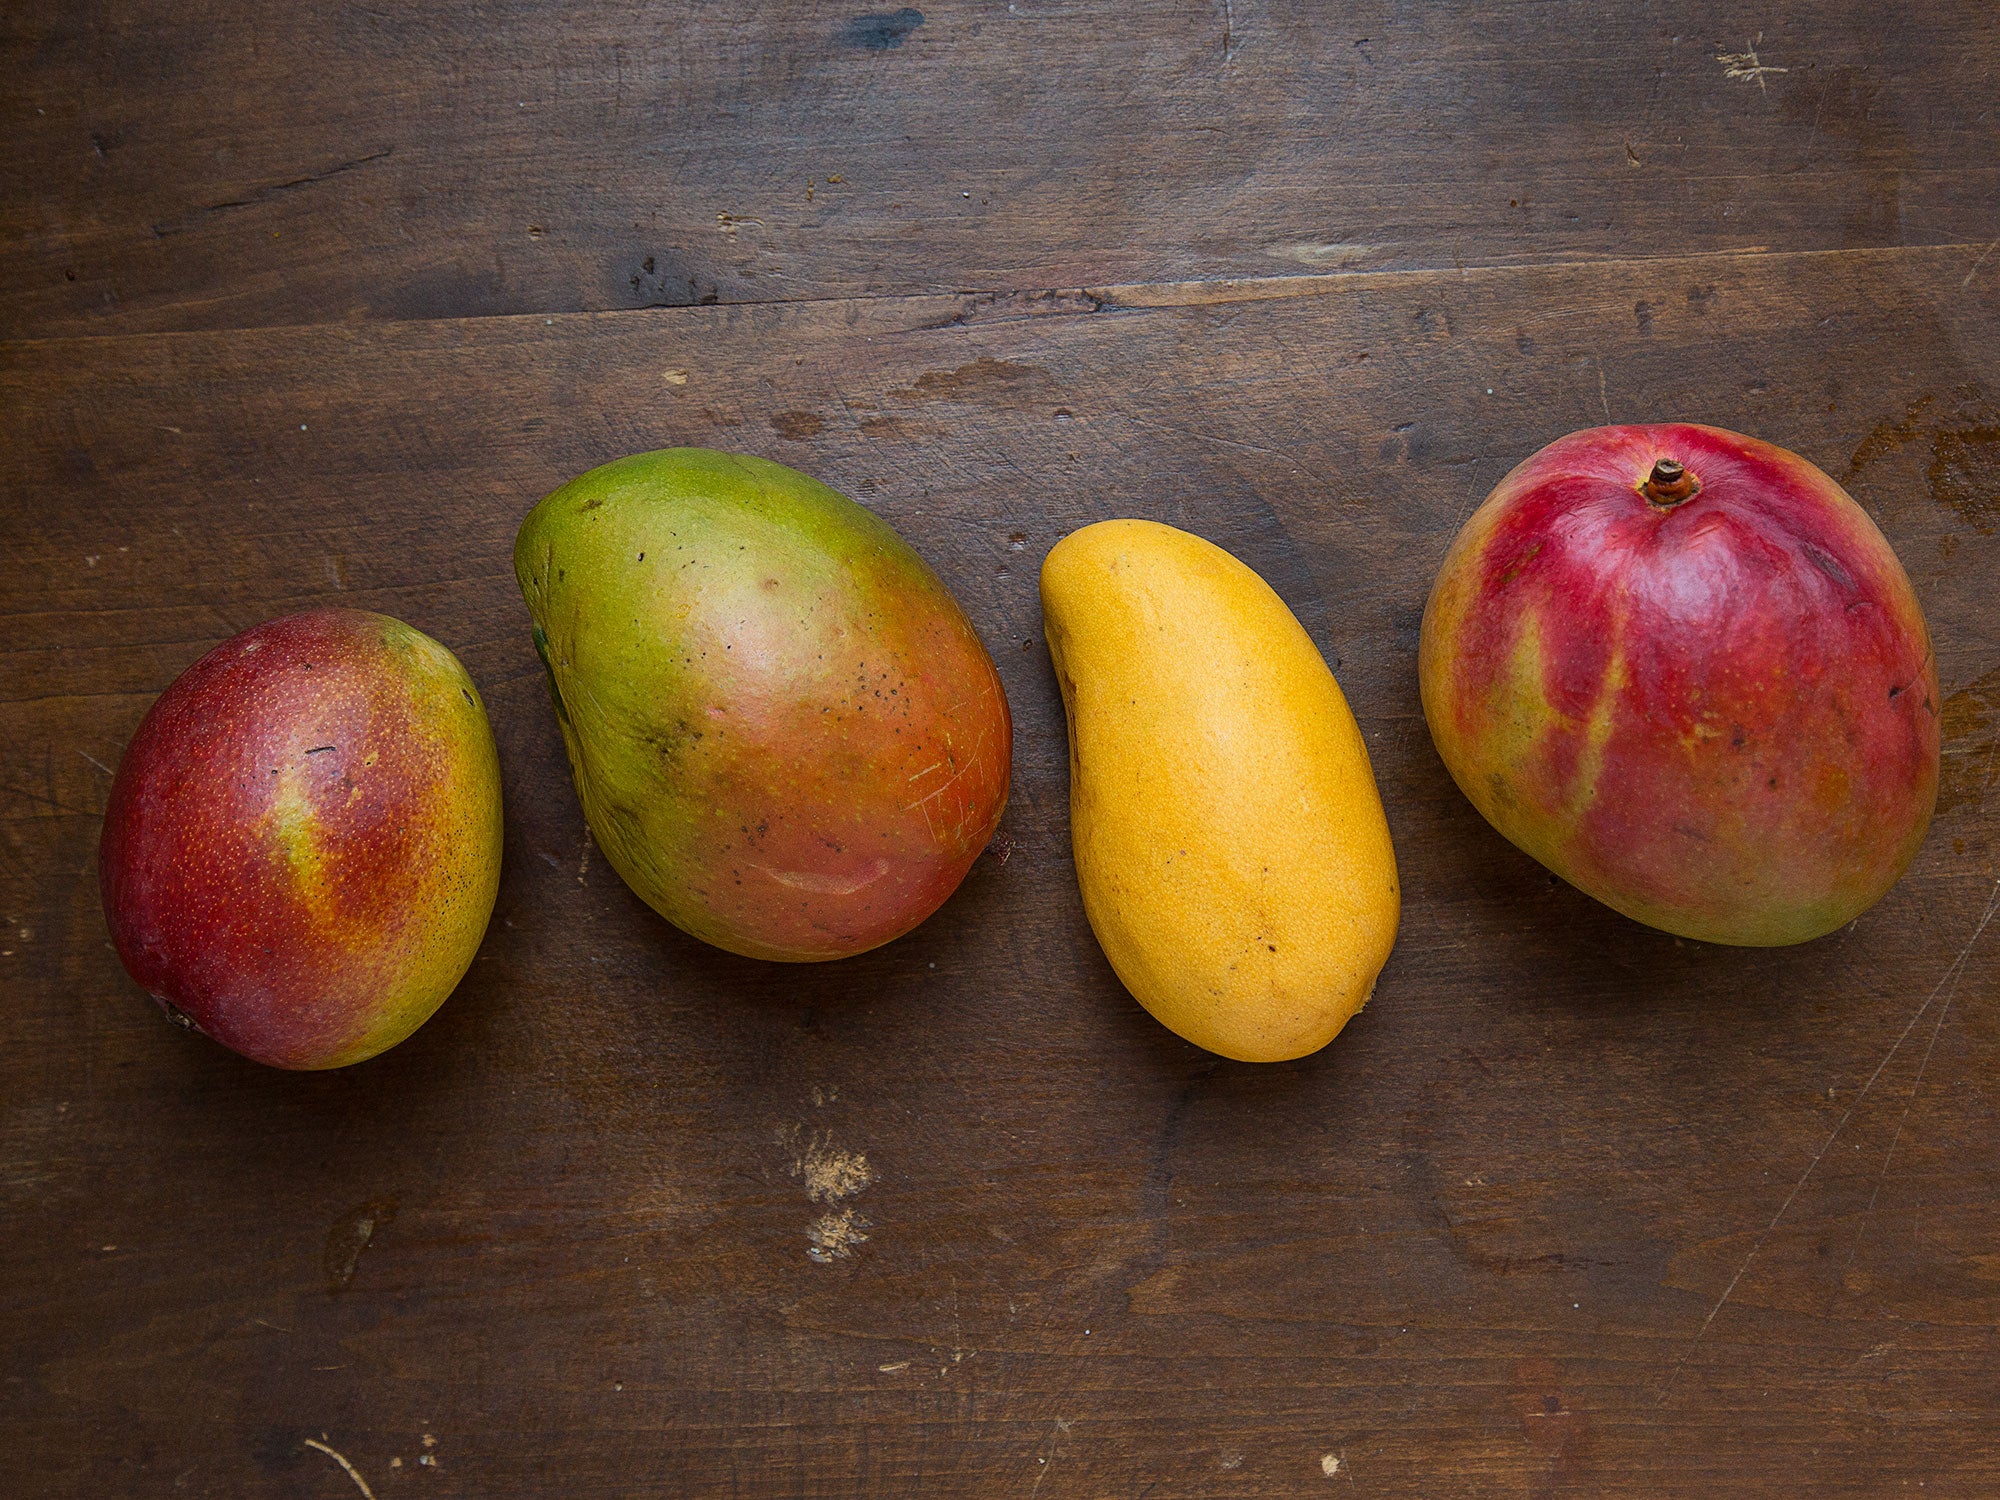 Different Types of Mangoes In India You Should Know About! – Devgad Mango